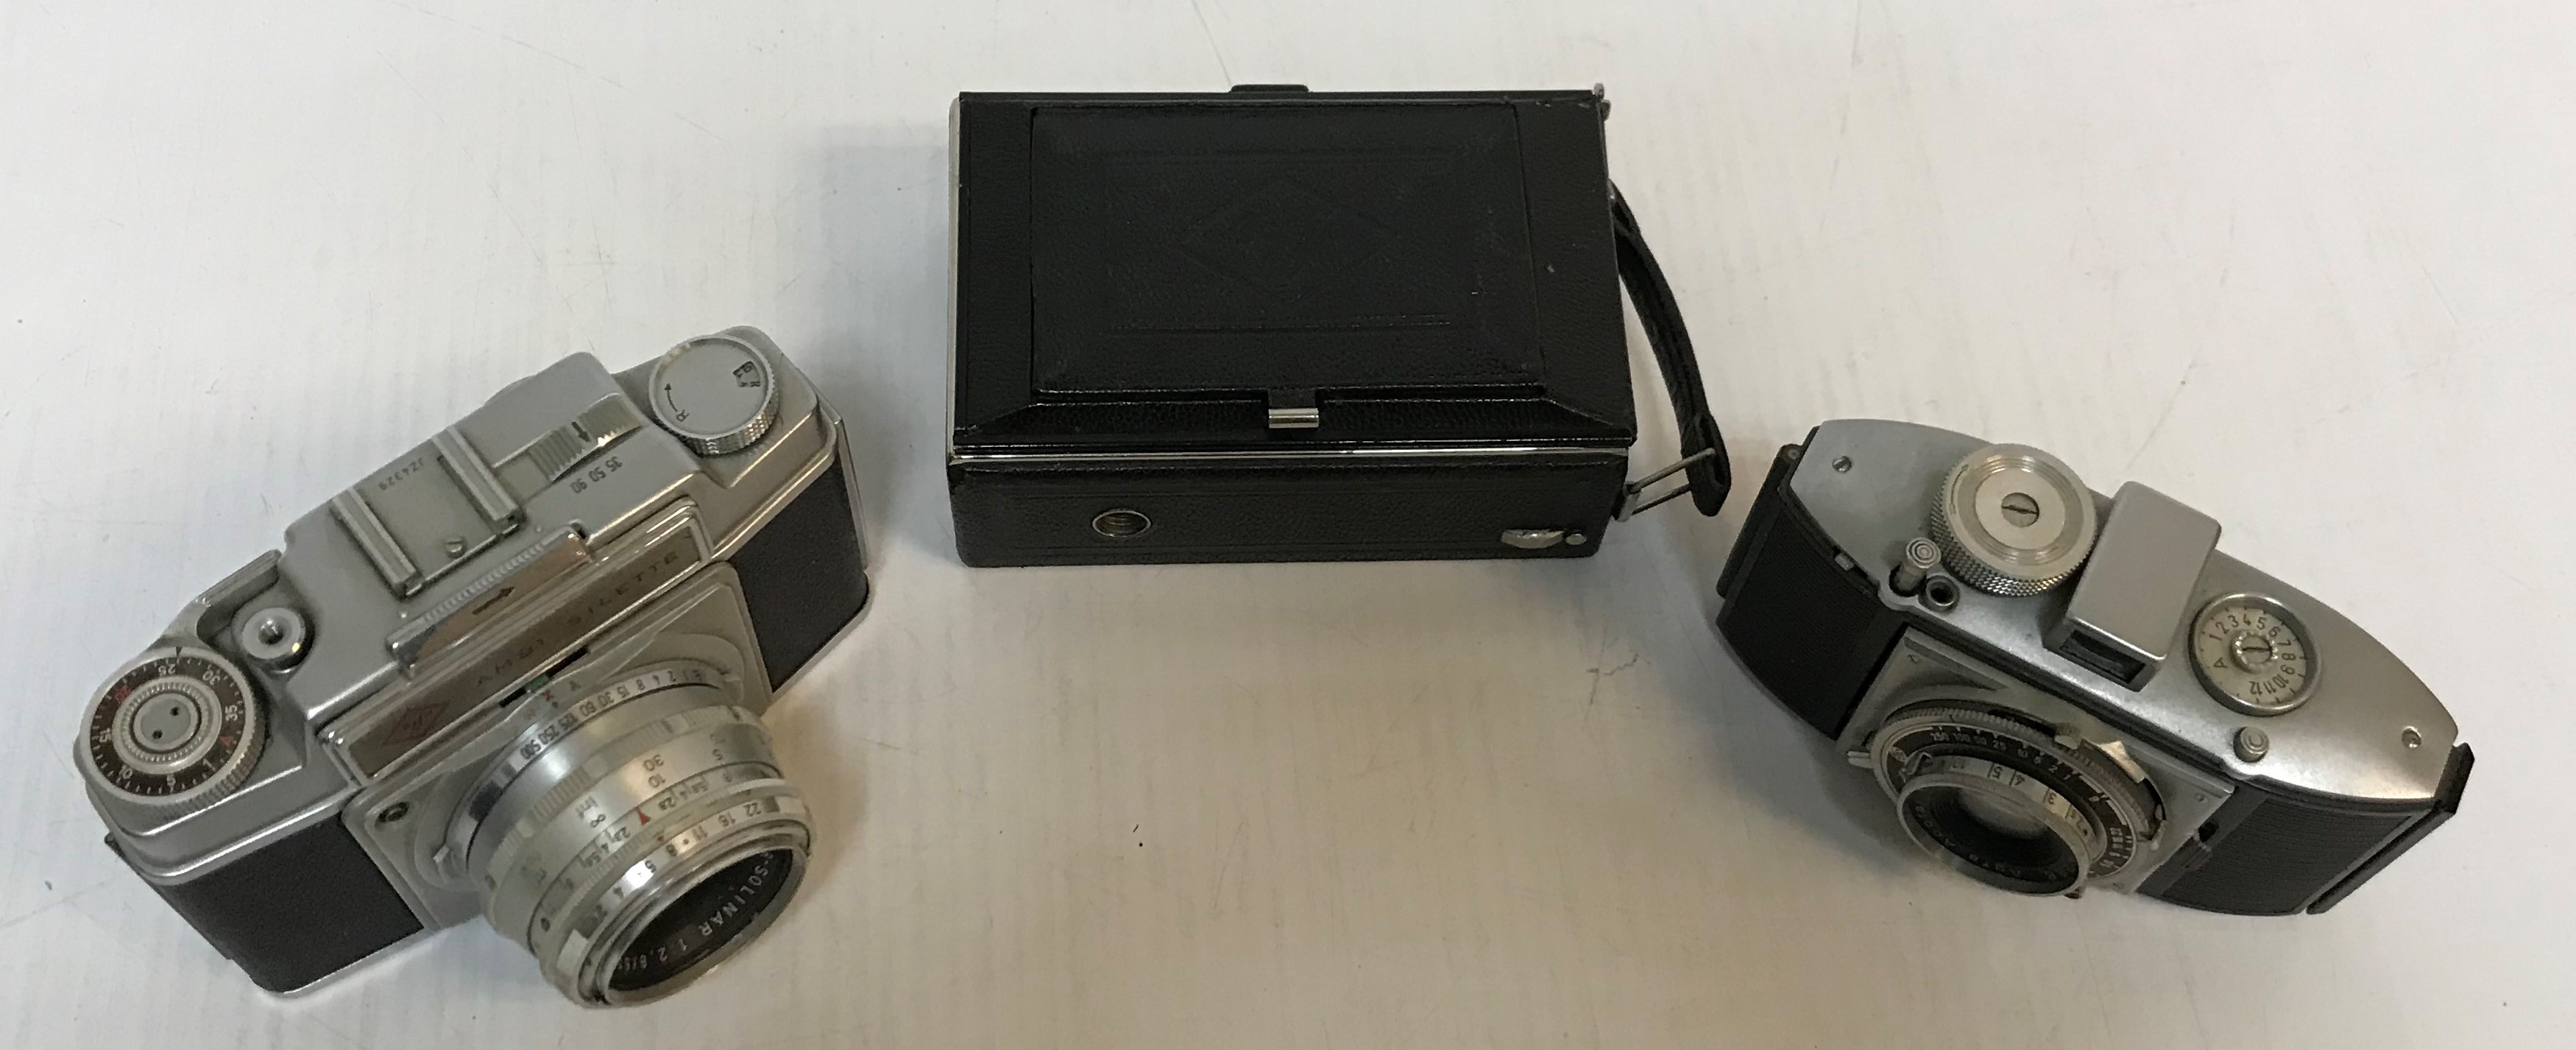 A collection of six various vintage Agfa cameras including an Ambi Silette, an Agfa Karat, - Image 5 of 6